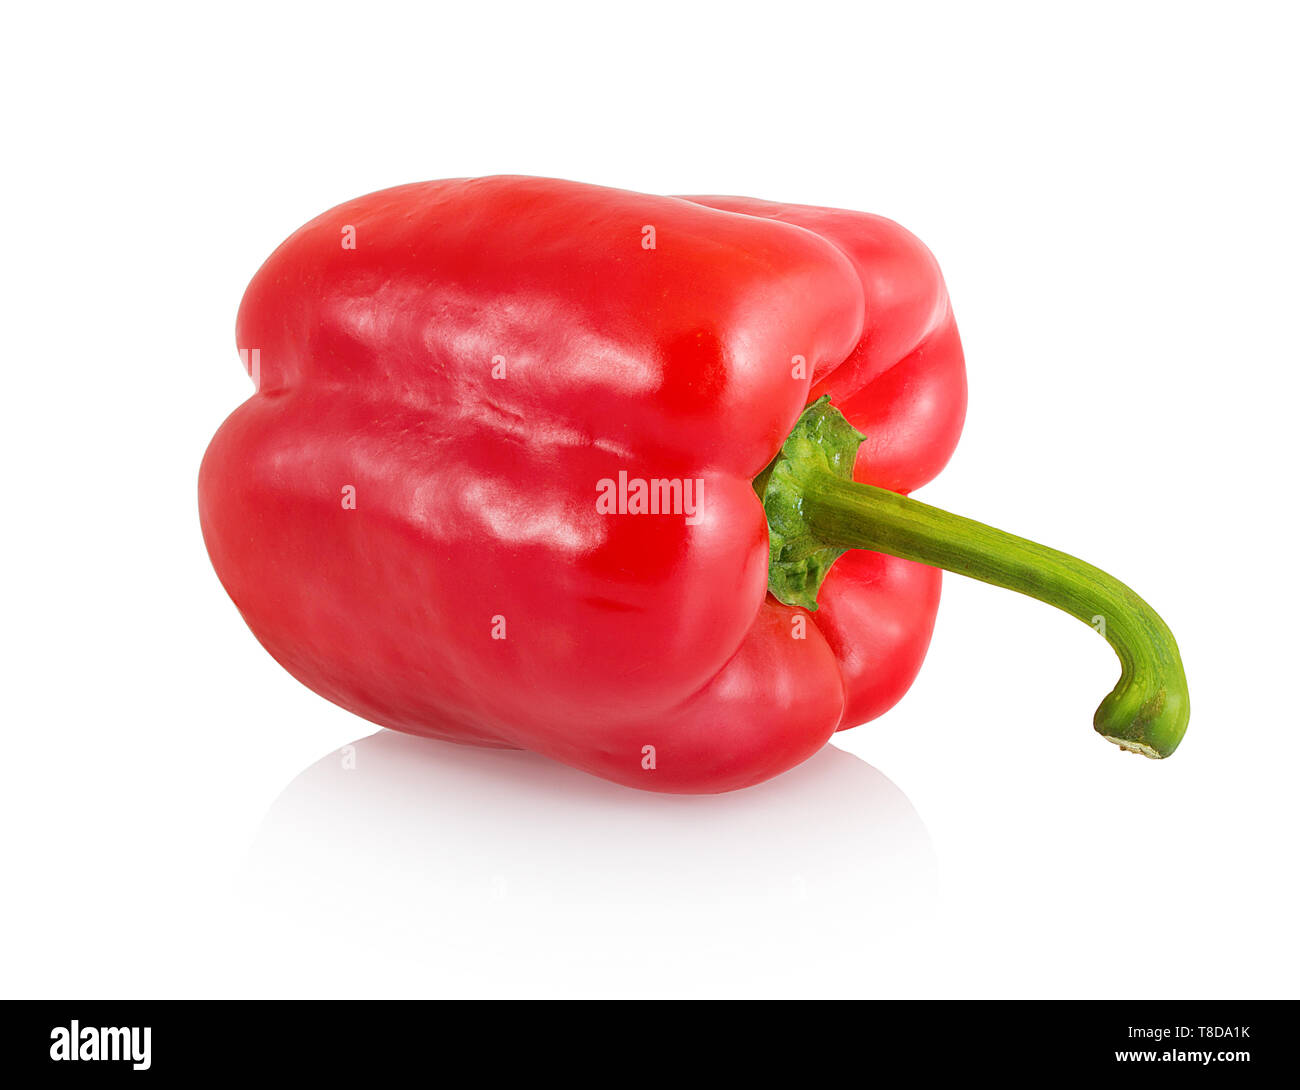 Sweet red bell pepper with green stem isolated on white background with shadow reflection. Red sweet pepper isolated with clipping path. Stock Photo